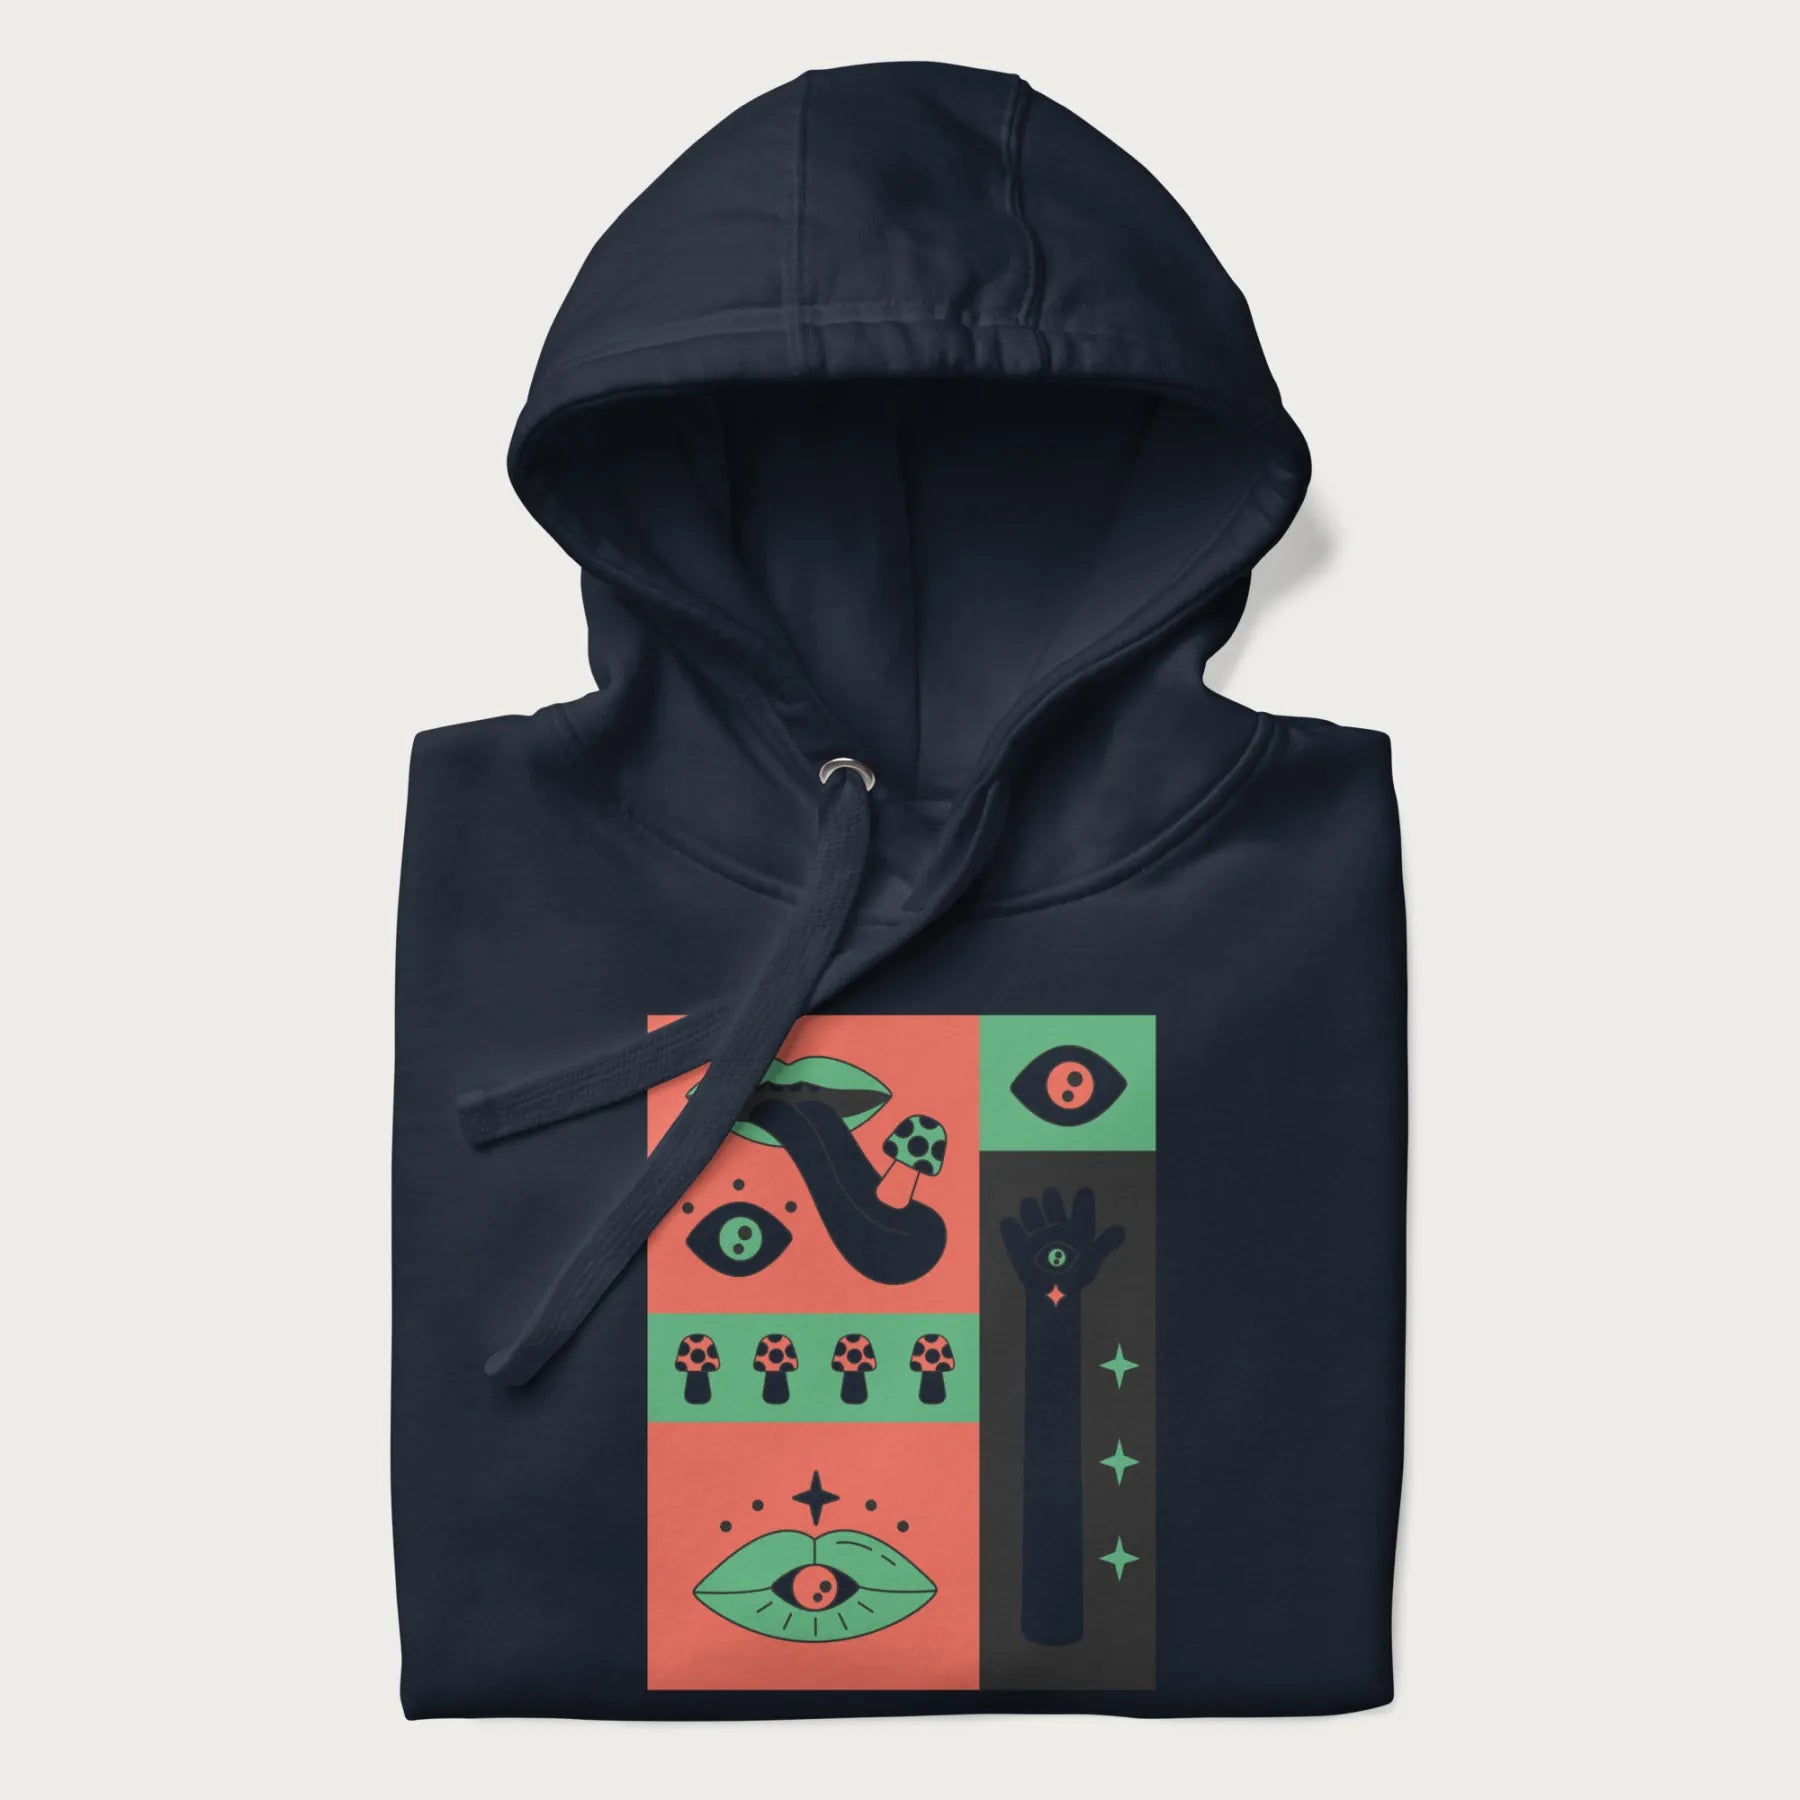 Folded navy blue hoodie with mushroom psychedelic designs of surreal elements like lips, eyes, and mushrooms.